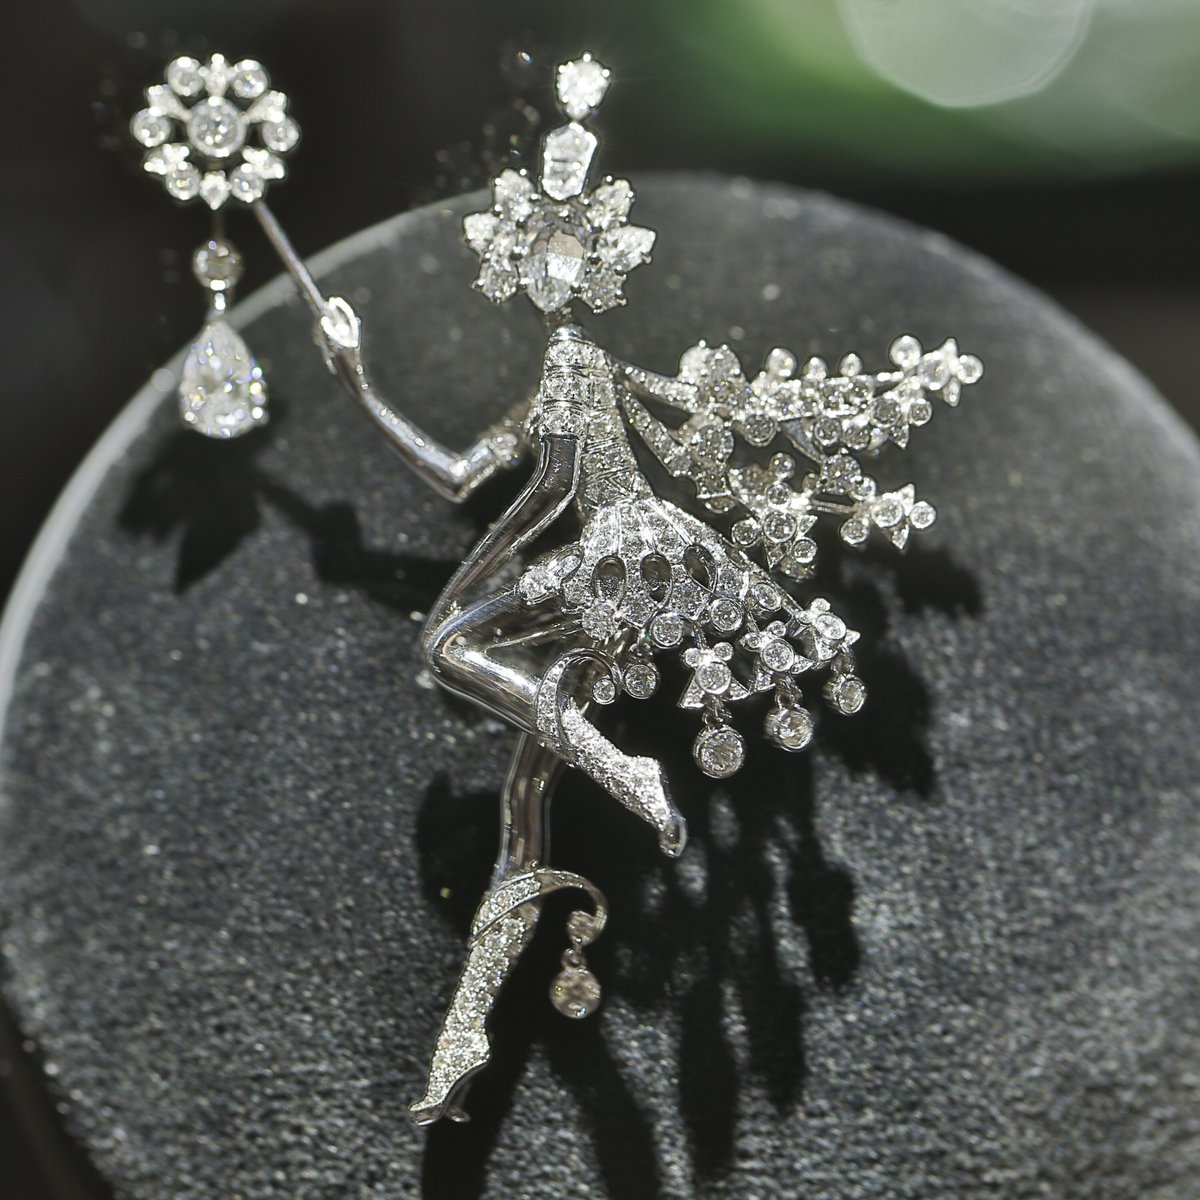 Van Cleef & Arpels is delighted to display the Automate Fée Ondine, alo...